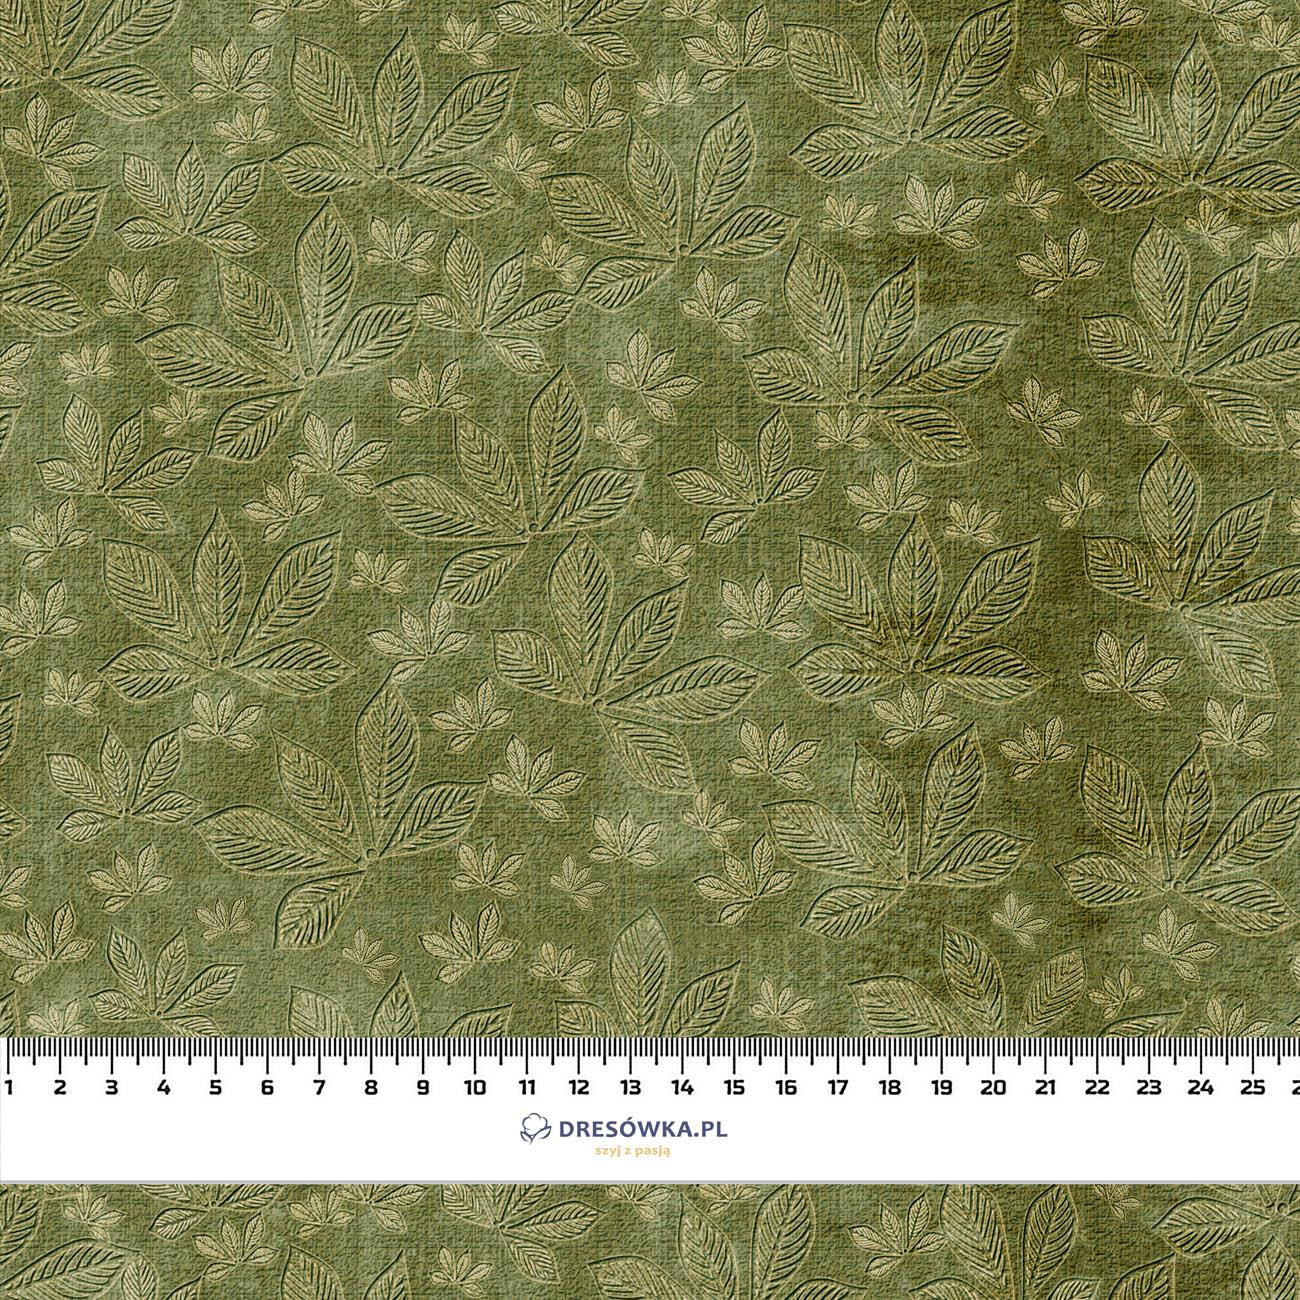 CHESTNUT LEAVES Ms.2 / green (AUTUMN COLORS) - Waterproof woven fabric